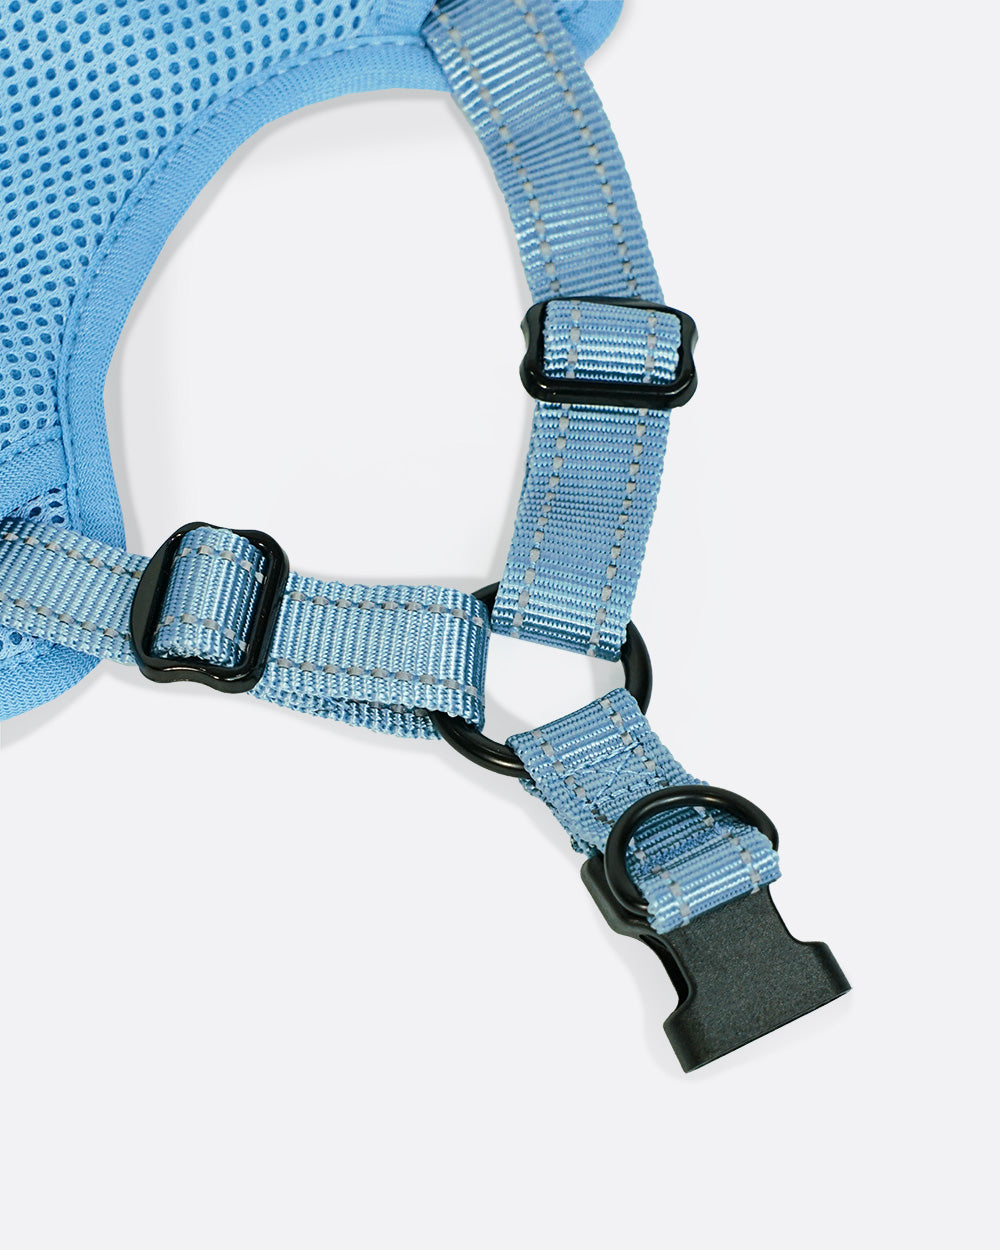 OxyMesh Flexi Step-in Harness - Sky Blue